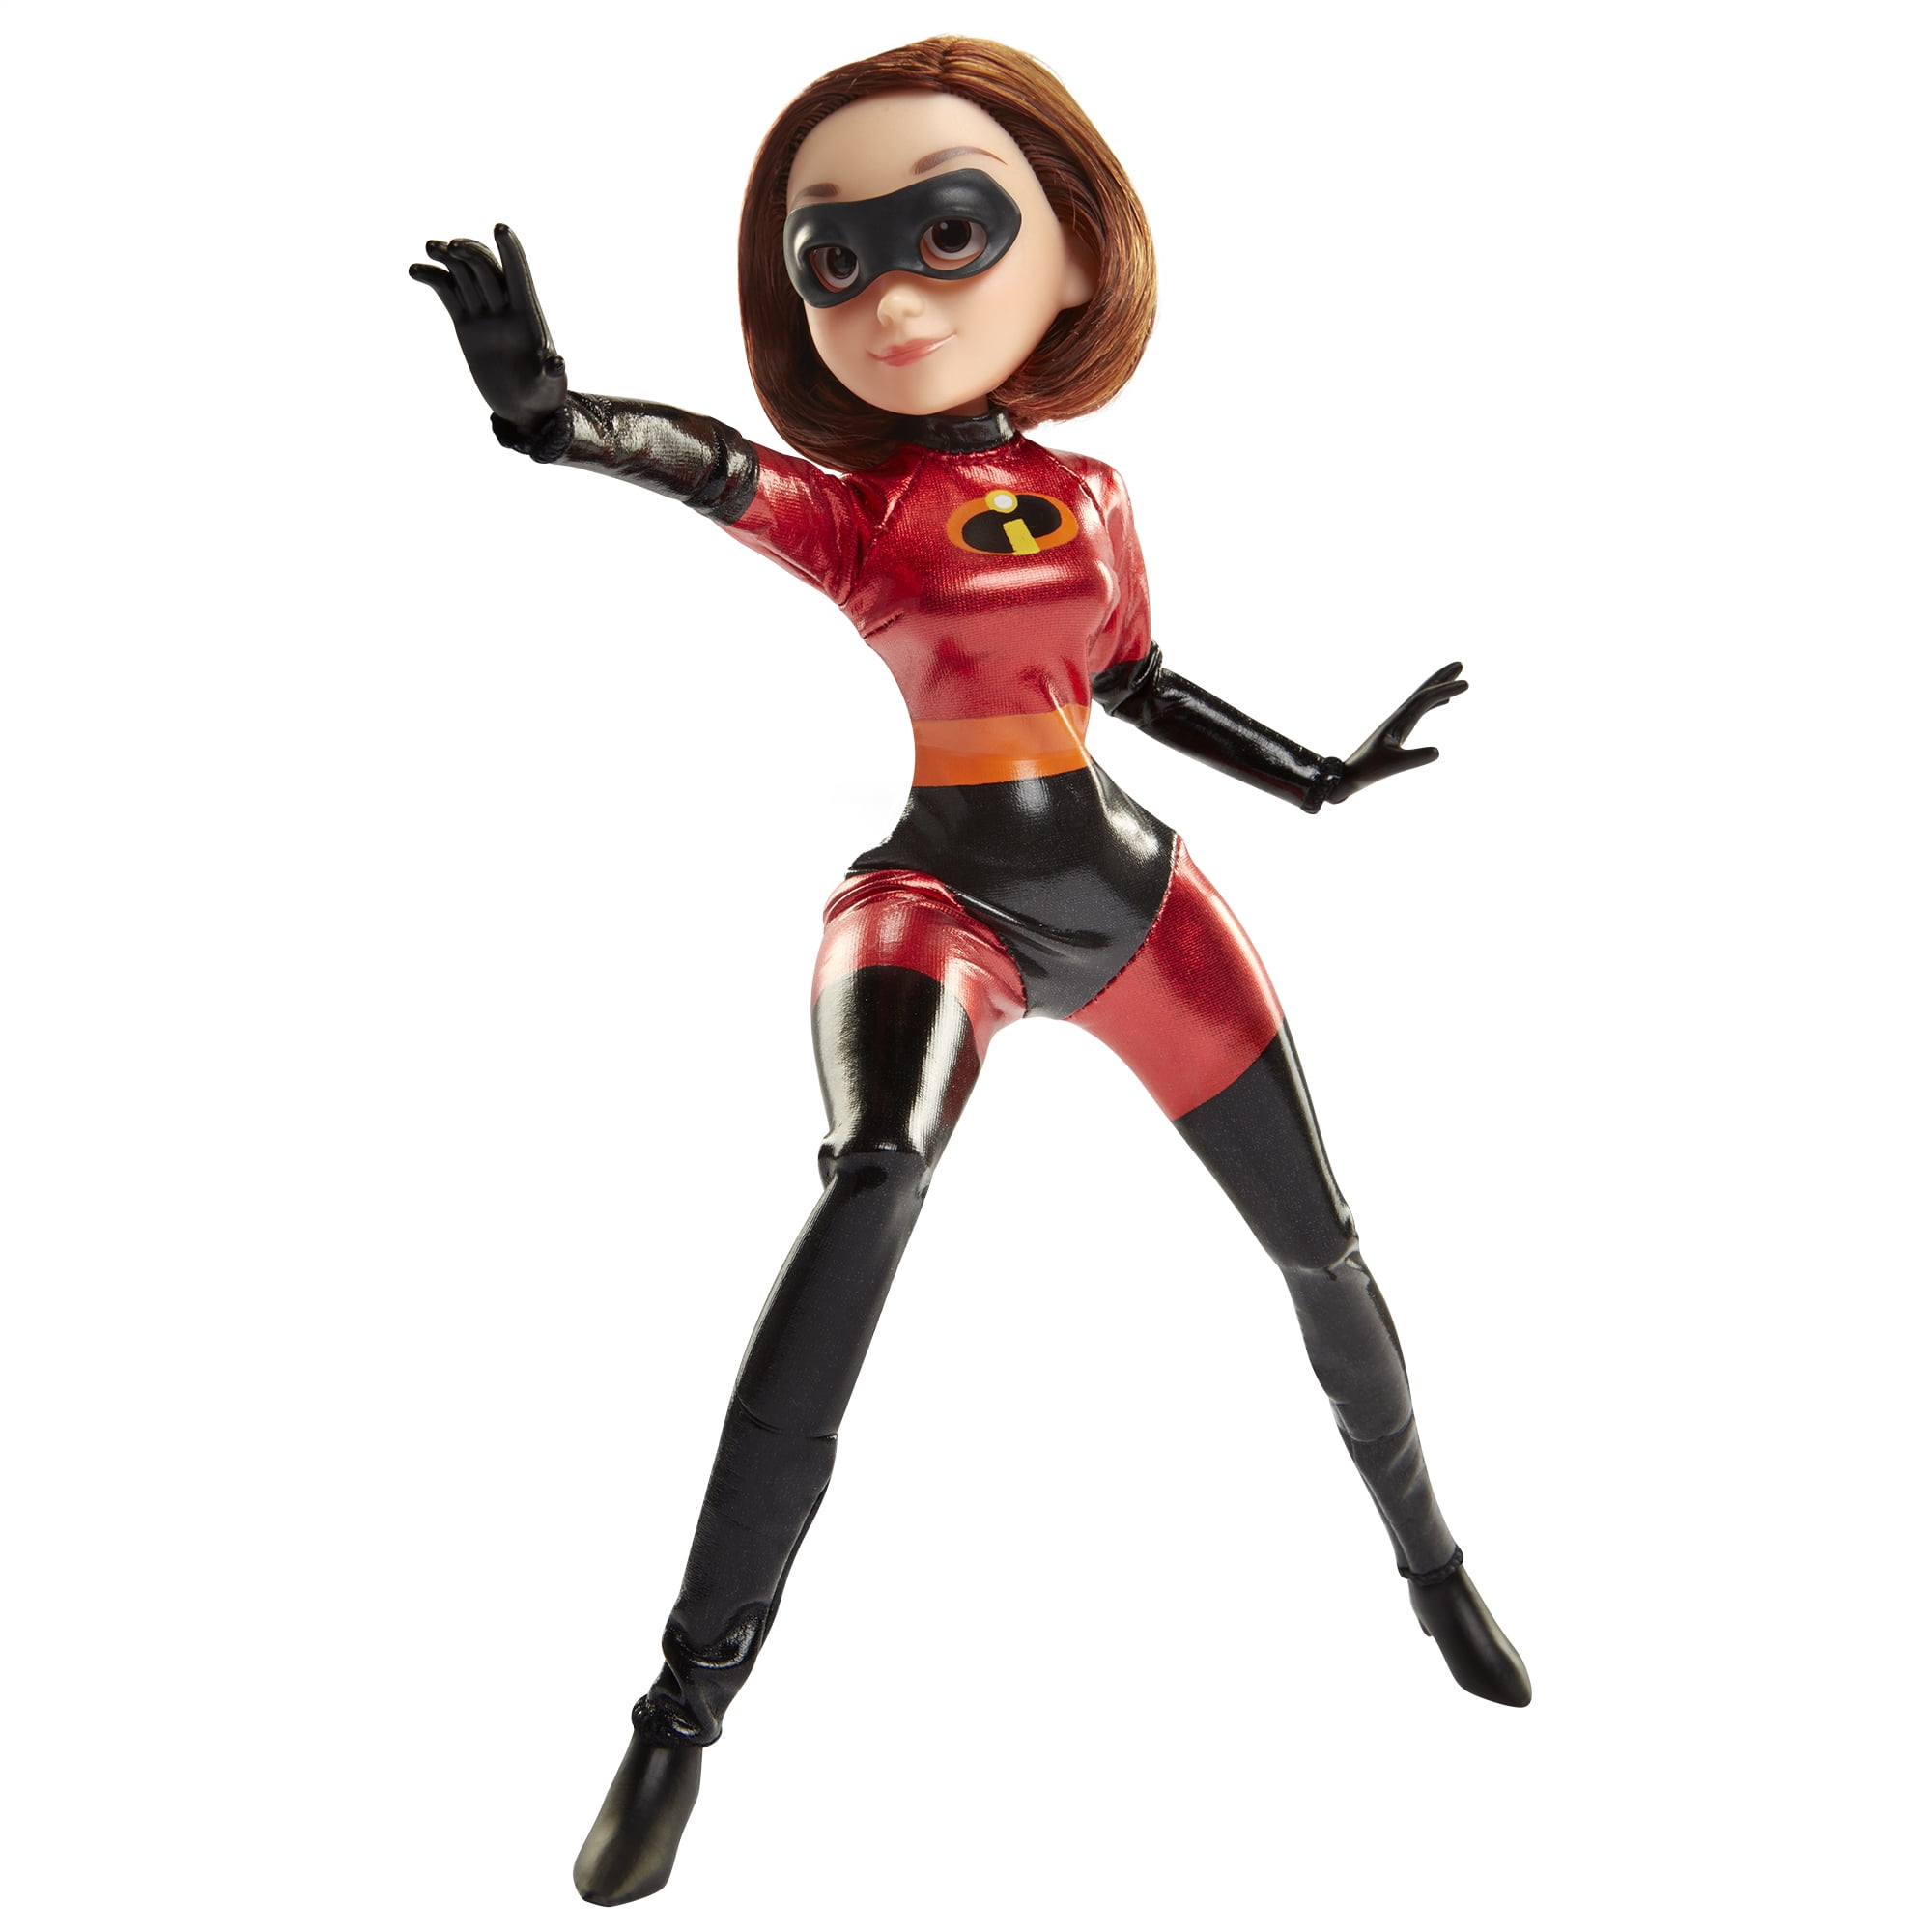 The Incredibles 2 Elastigirl Action Figure 11” Articulated Doll in Deluxe Silver 